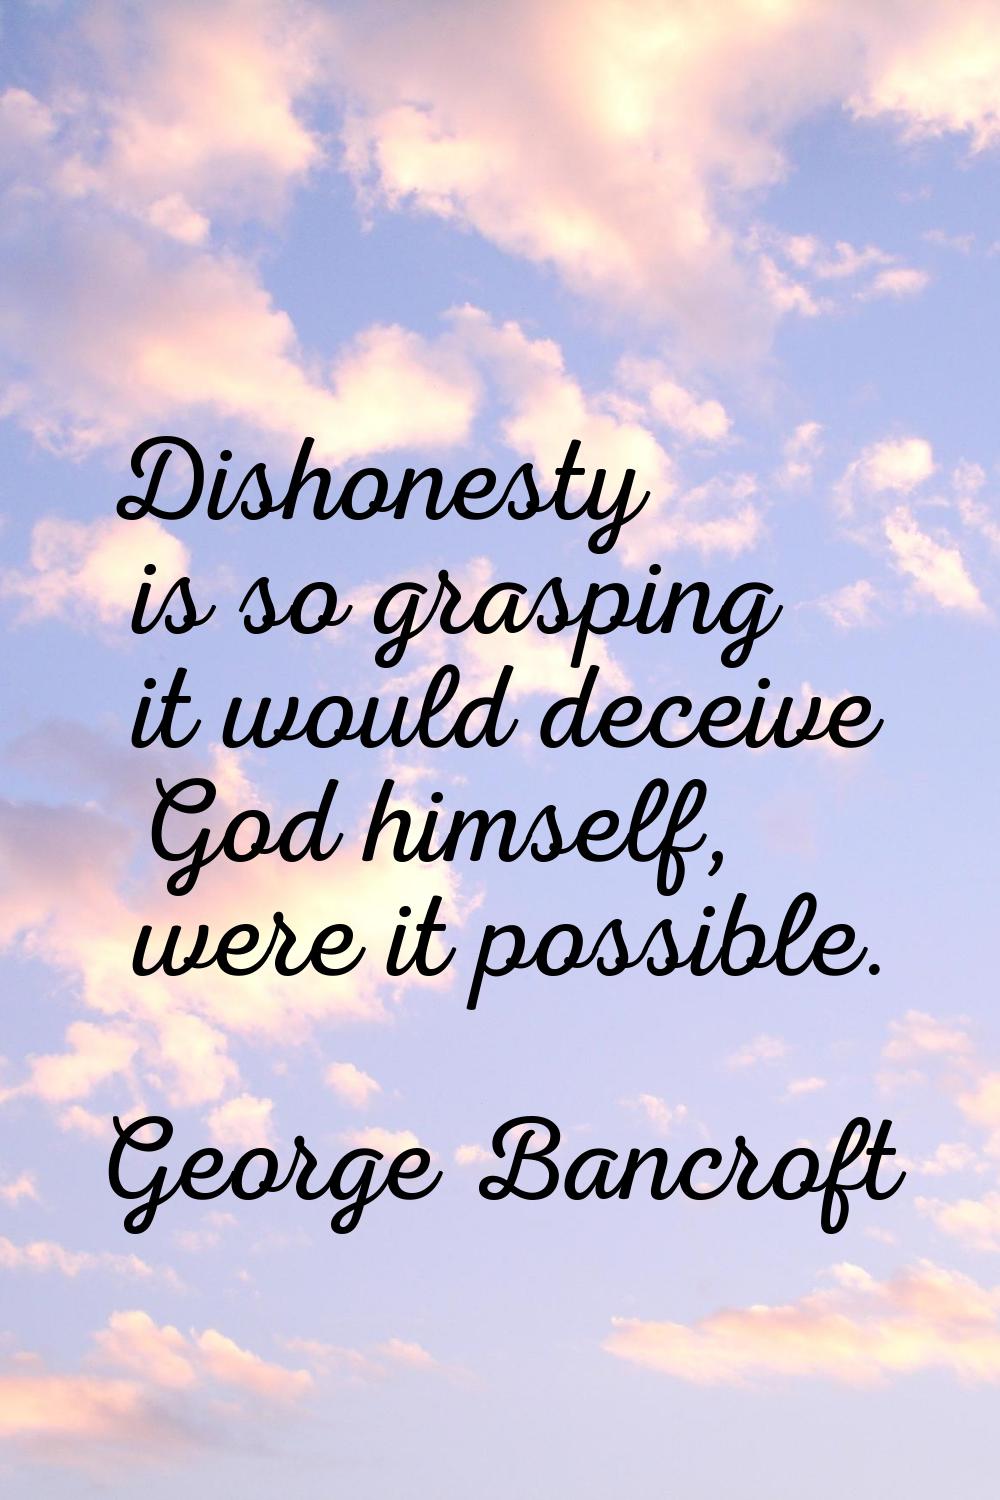 Dishonesty is so grasping it would deceive God himself, were it possible.